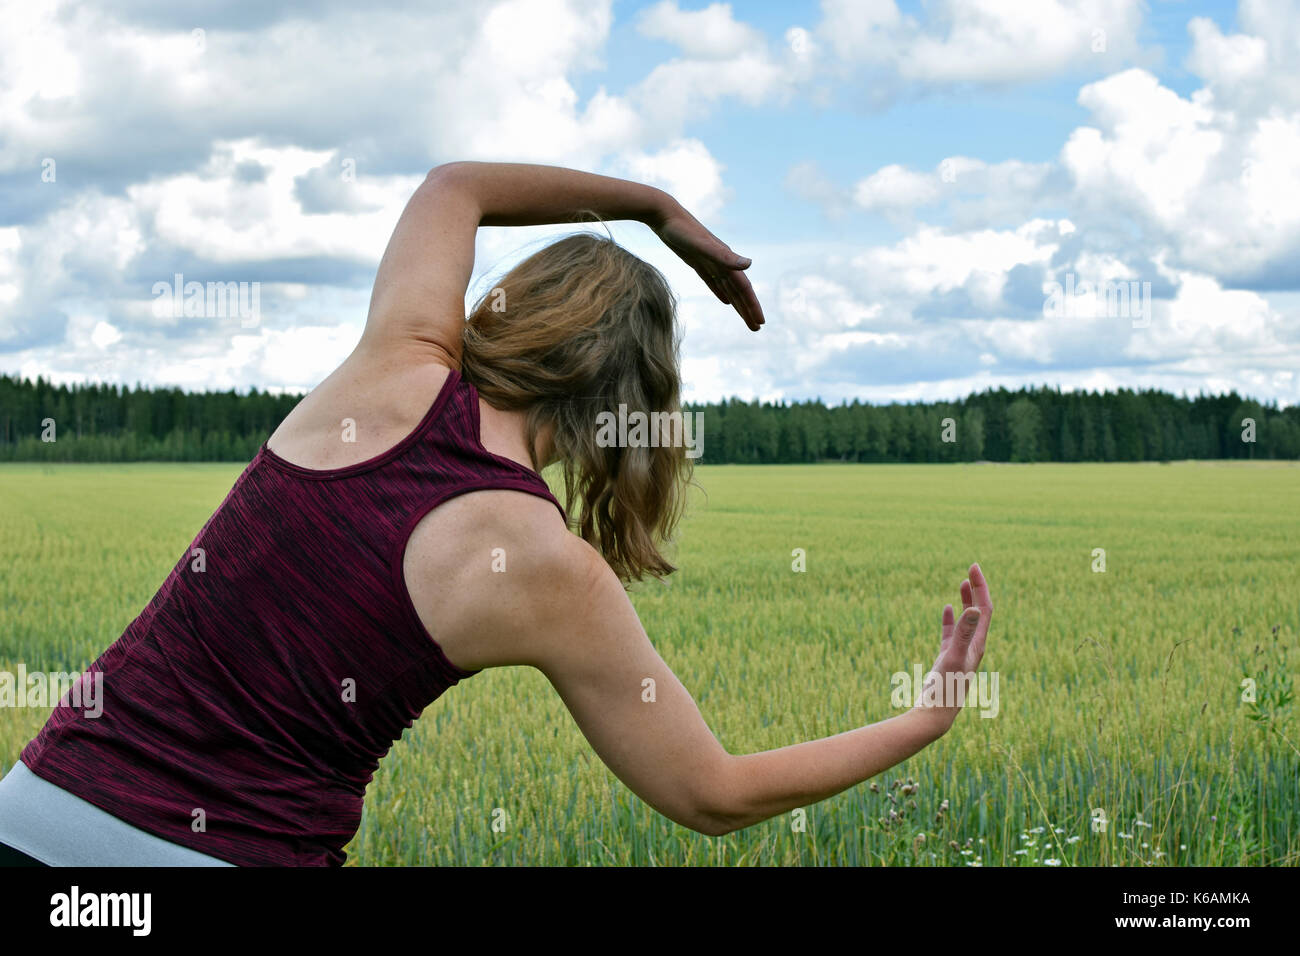 Middle aged yoga woman stretching and exercise outdoors. Rear view, field on background. Stock Photo